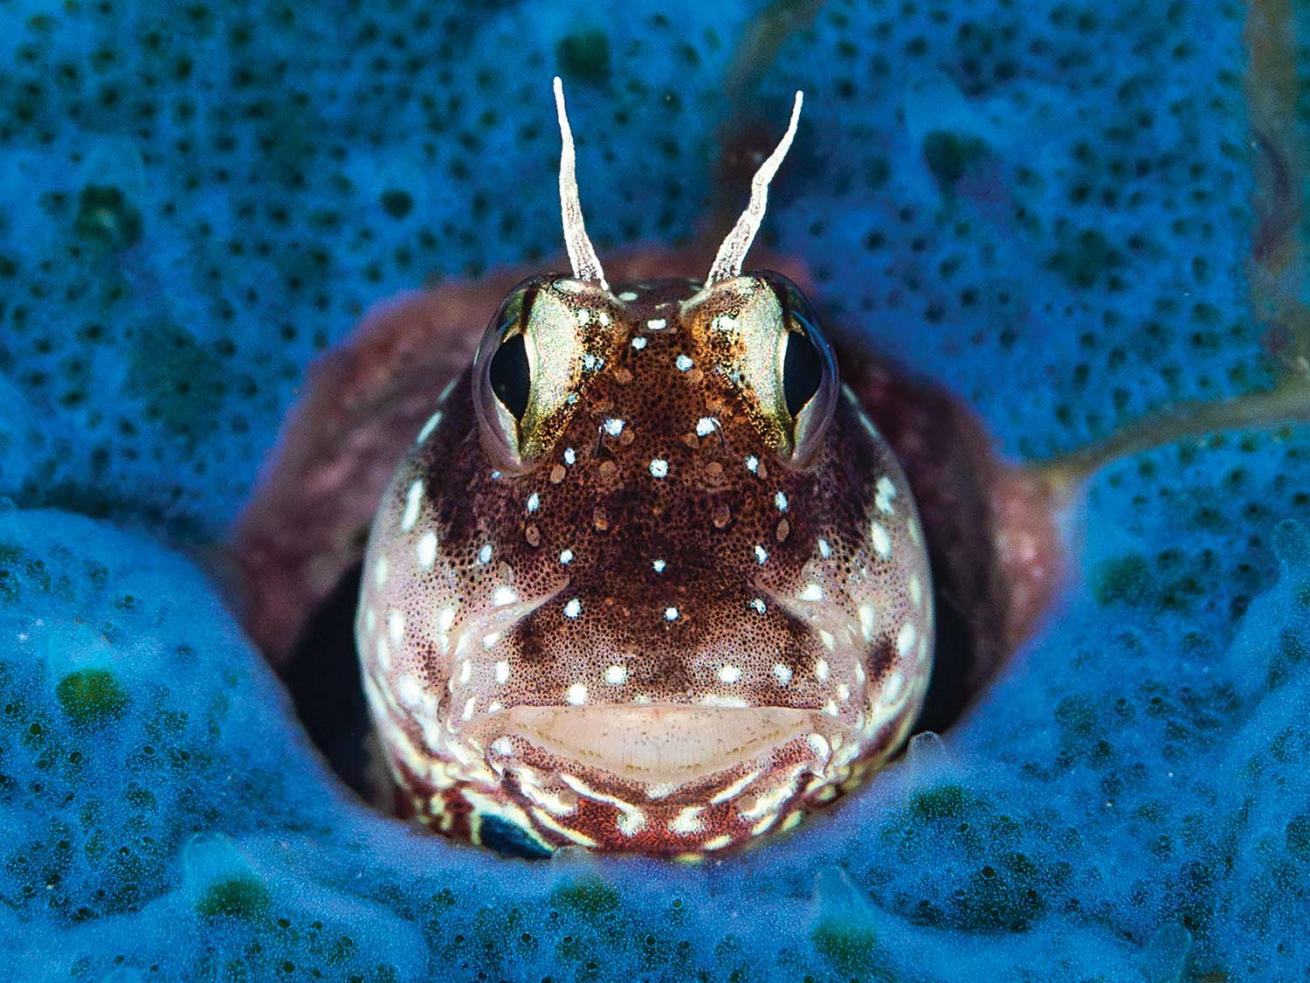 blenny peeks out of its home